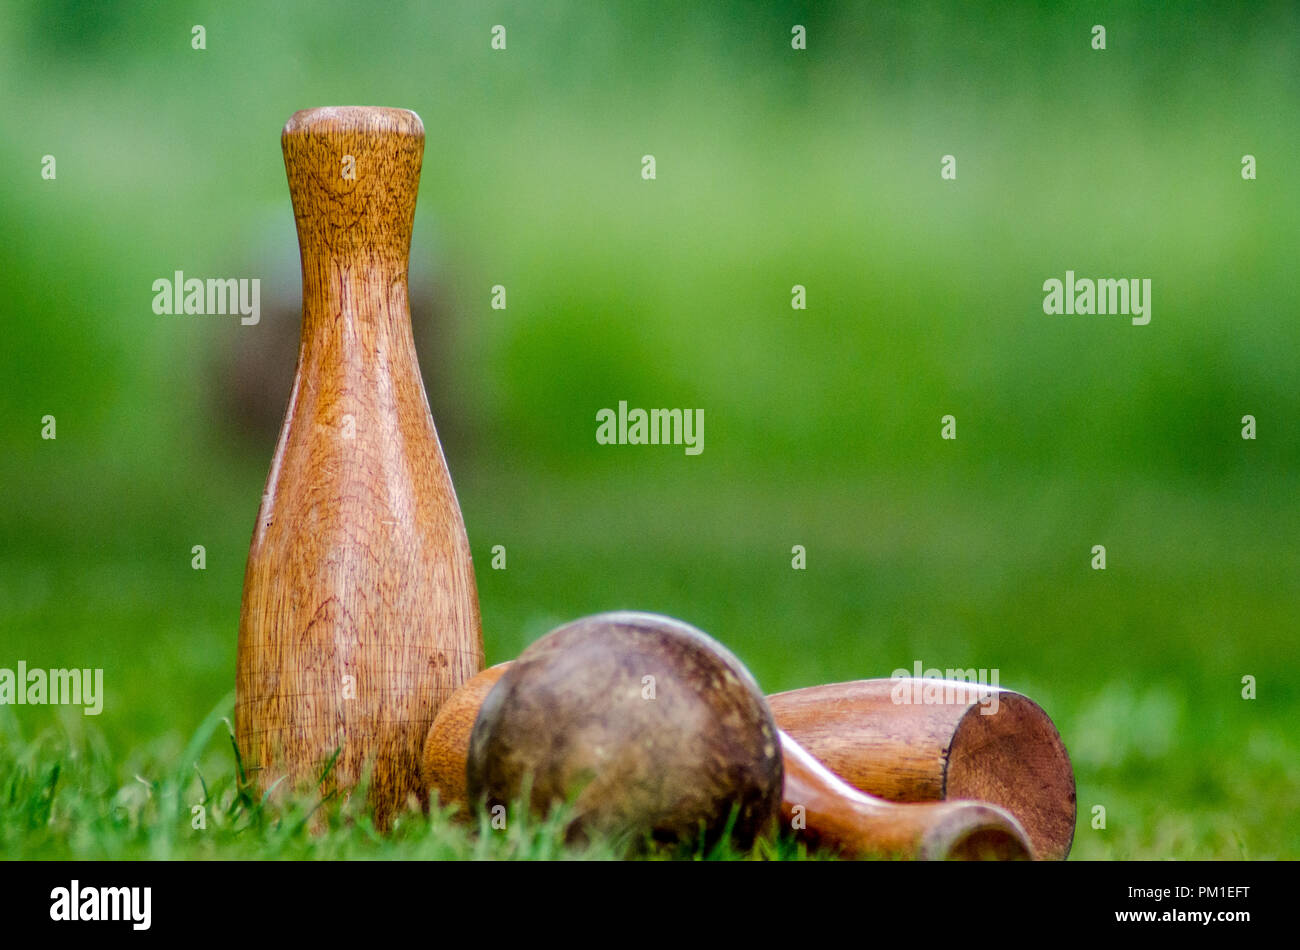 A wooden lawn skittles set on out of focus grass Stock Photo